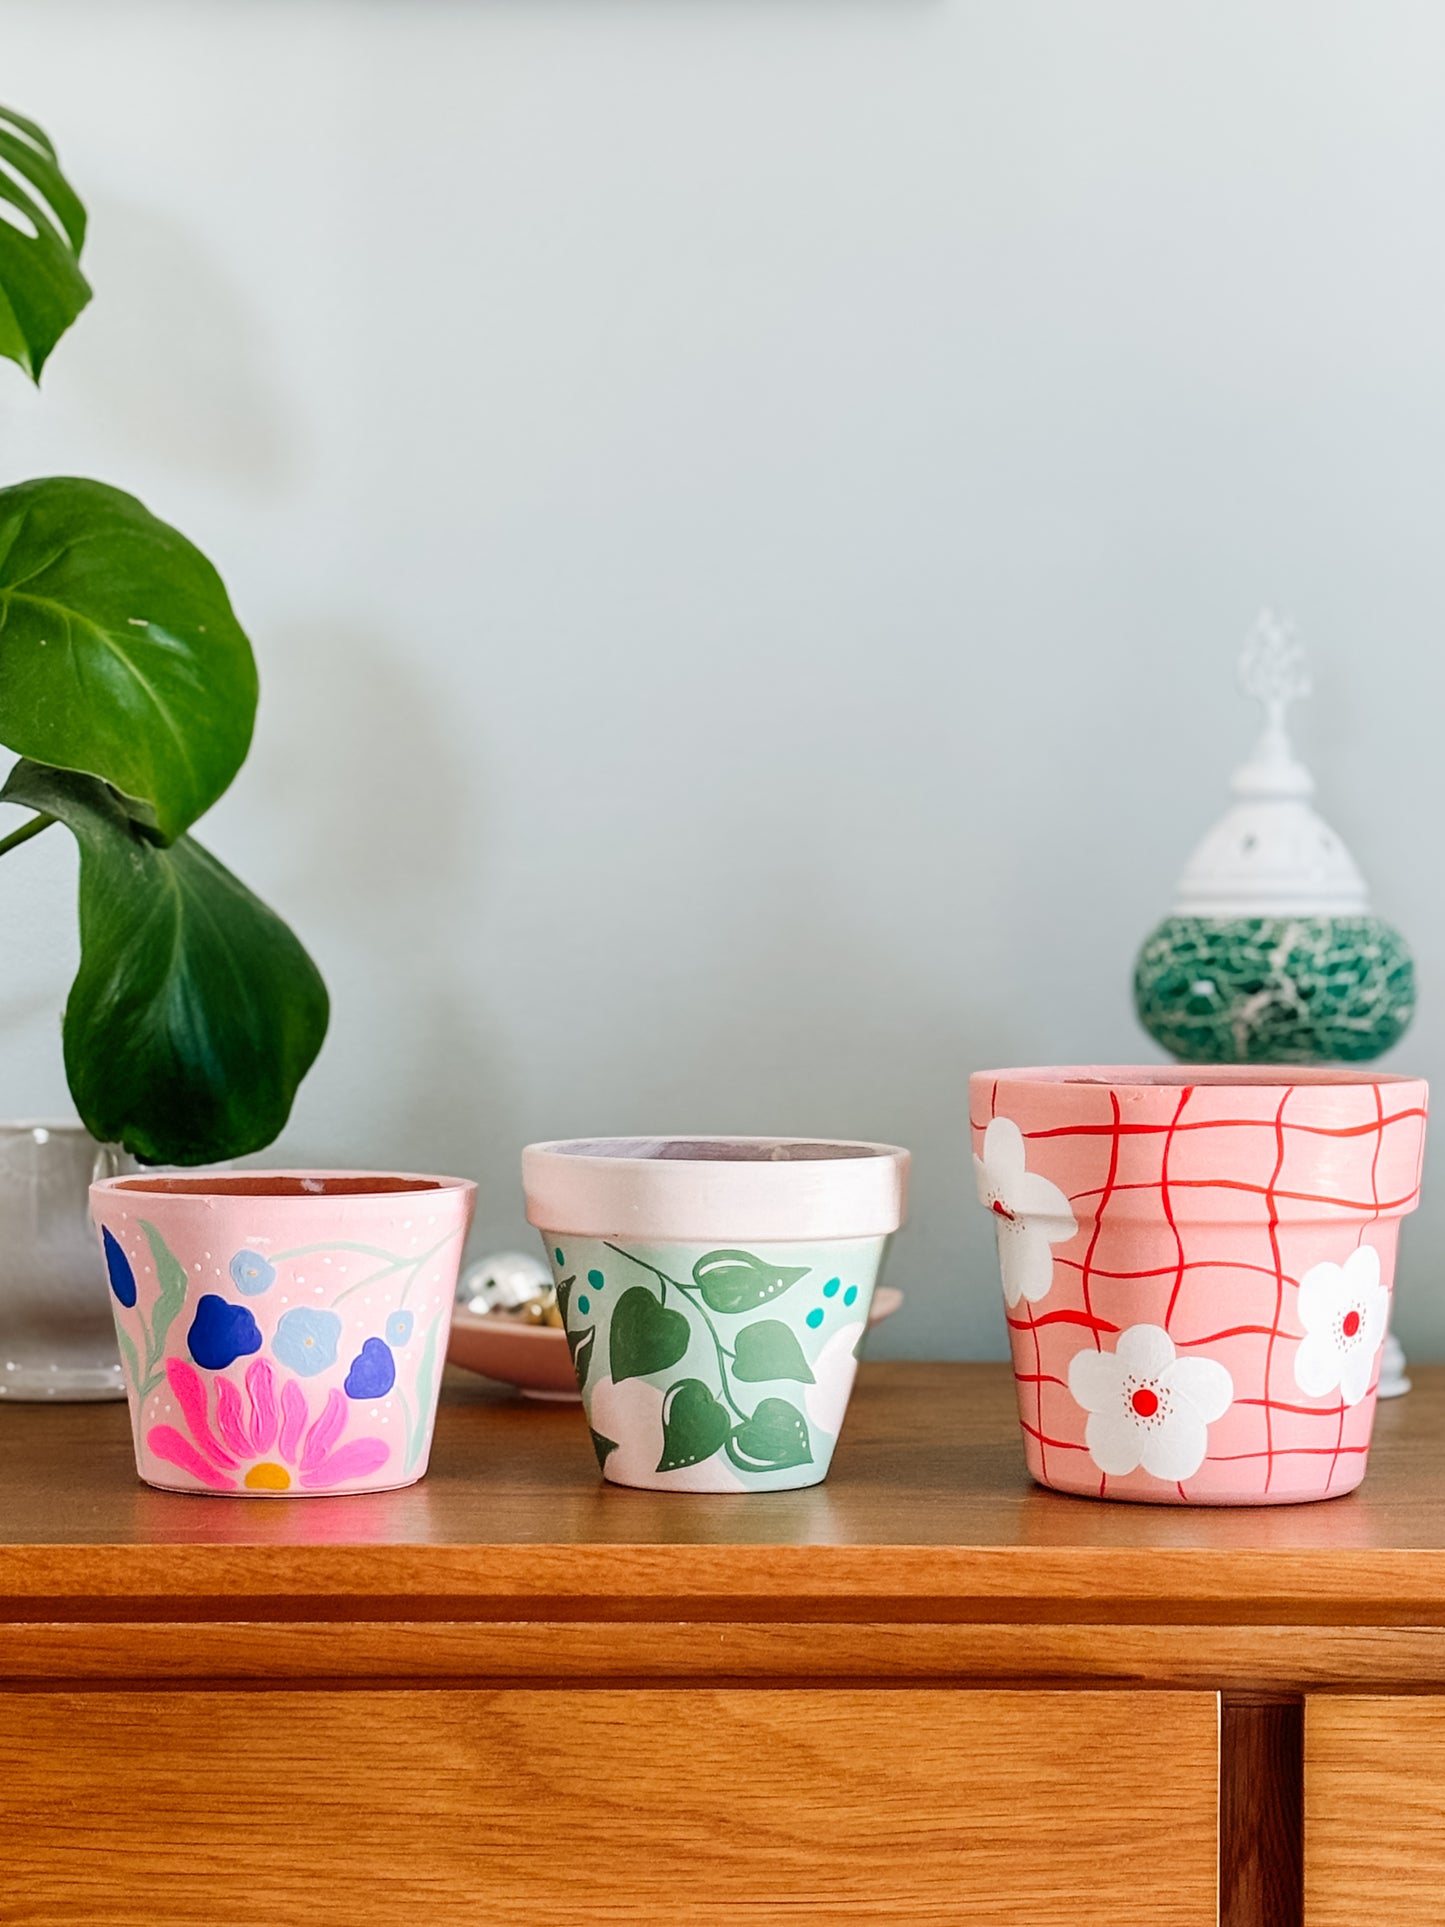 Crafternoons May Session: Painting Plant Pots